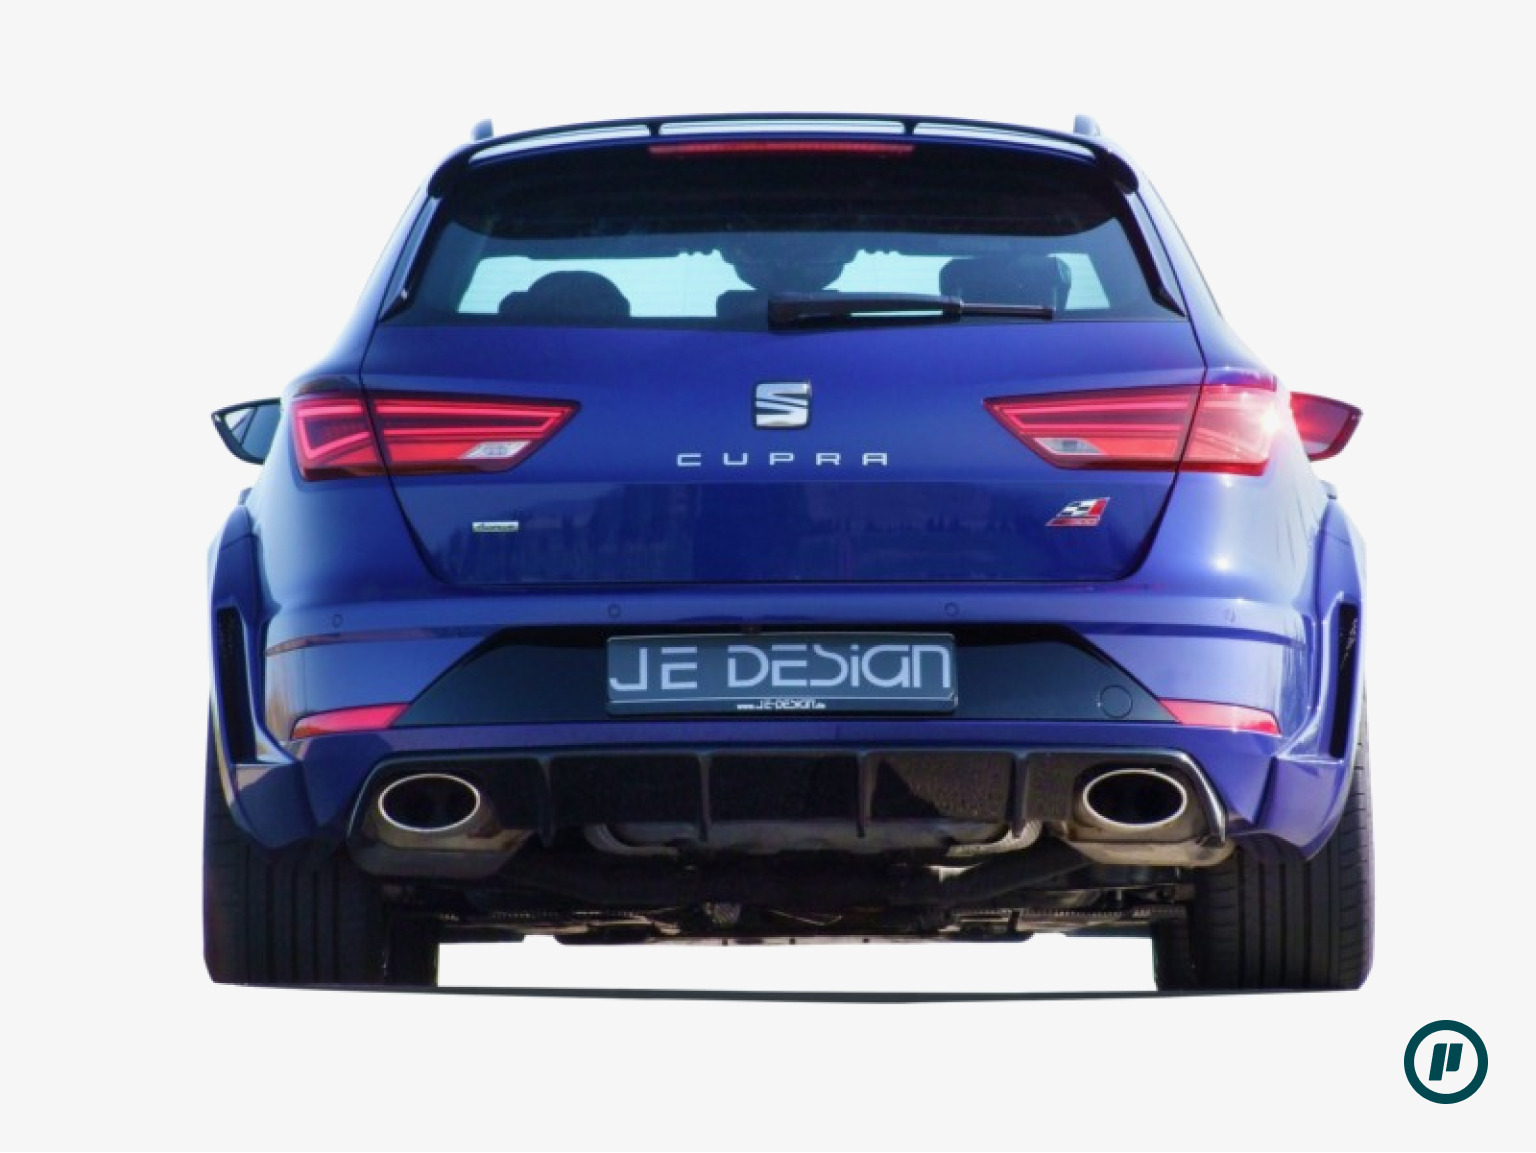 JE Design - Aero Kit Widebody for Seat Leon 5F (Compatible with FR, ST & Cupra)